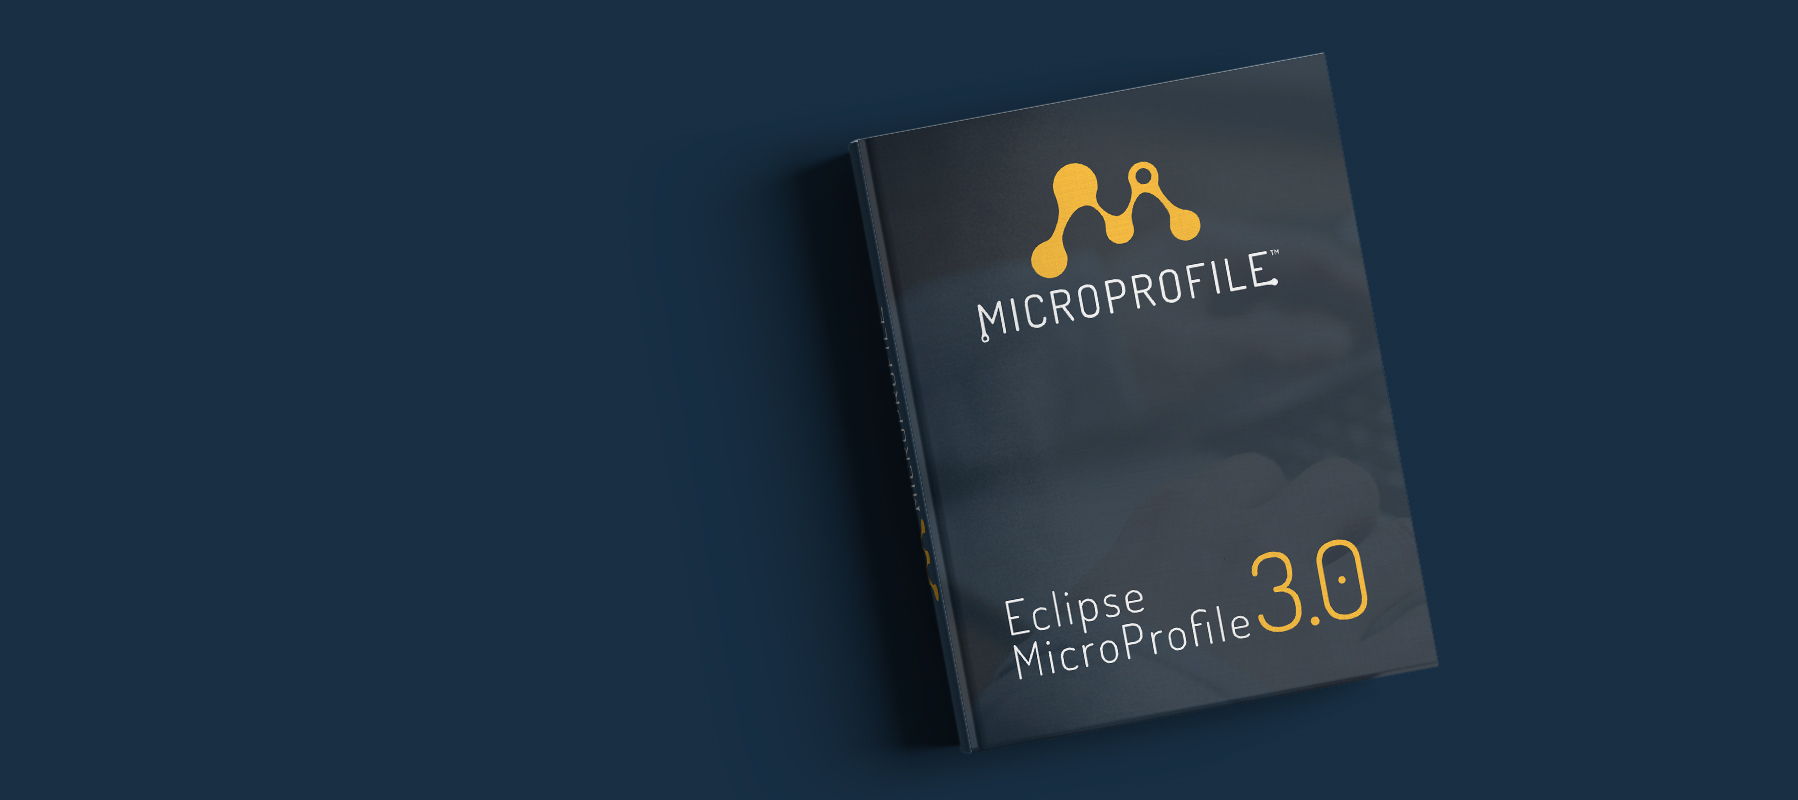 Eclipse MicroProfile 3.0 is Now Available